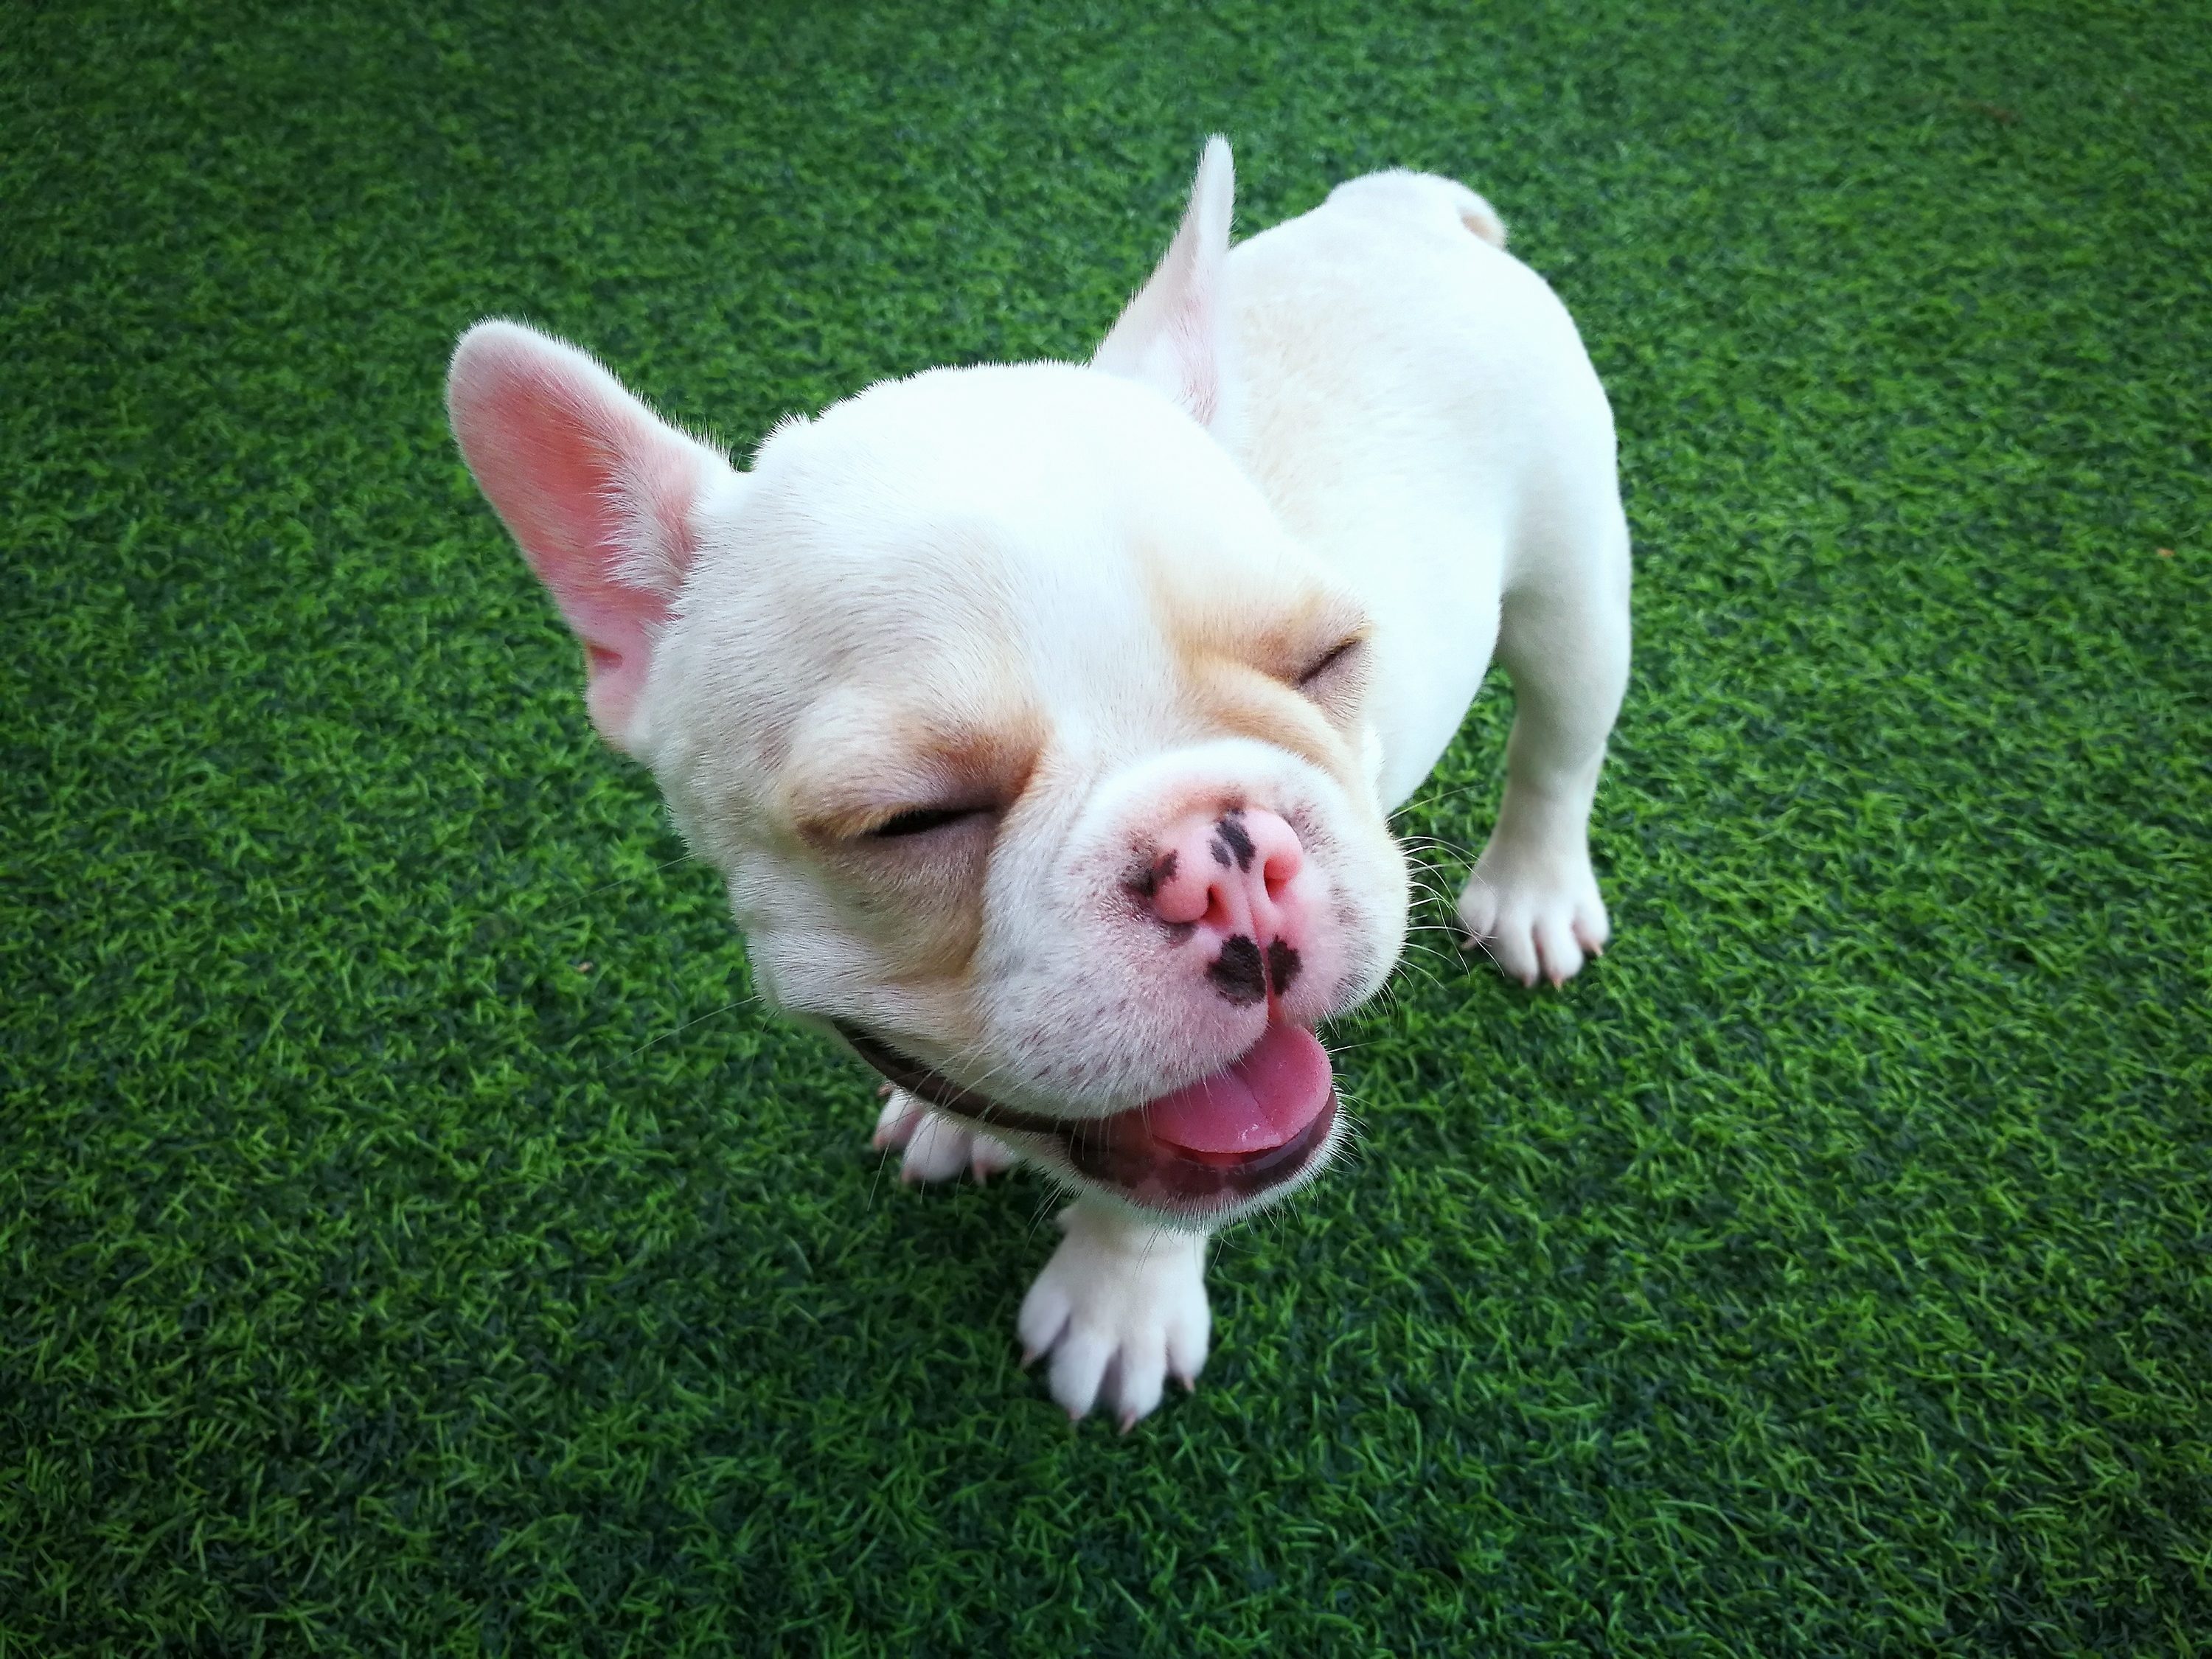 Artificial Turf Maintenance Tips for Muddy Paws &amp; More!